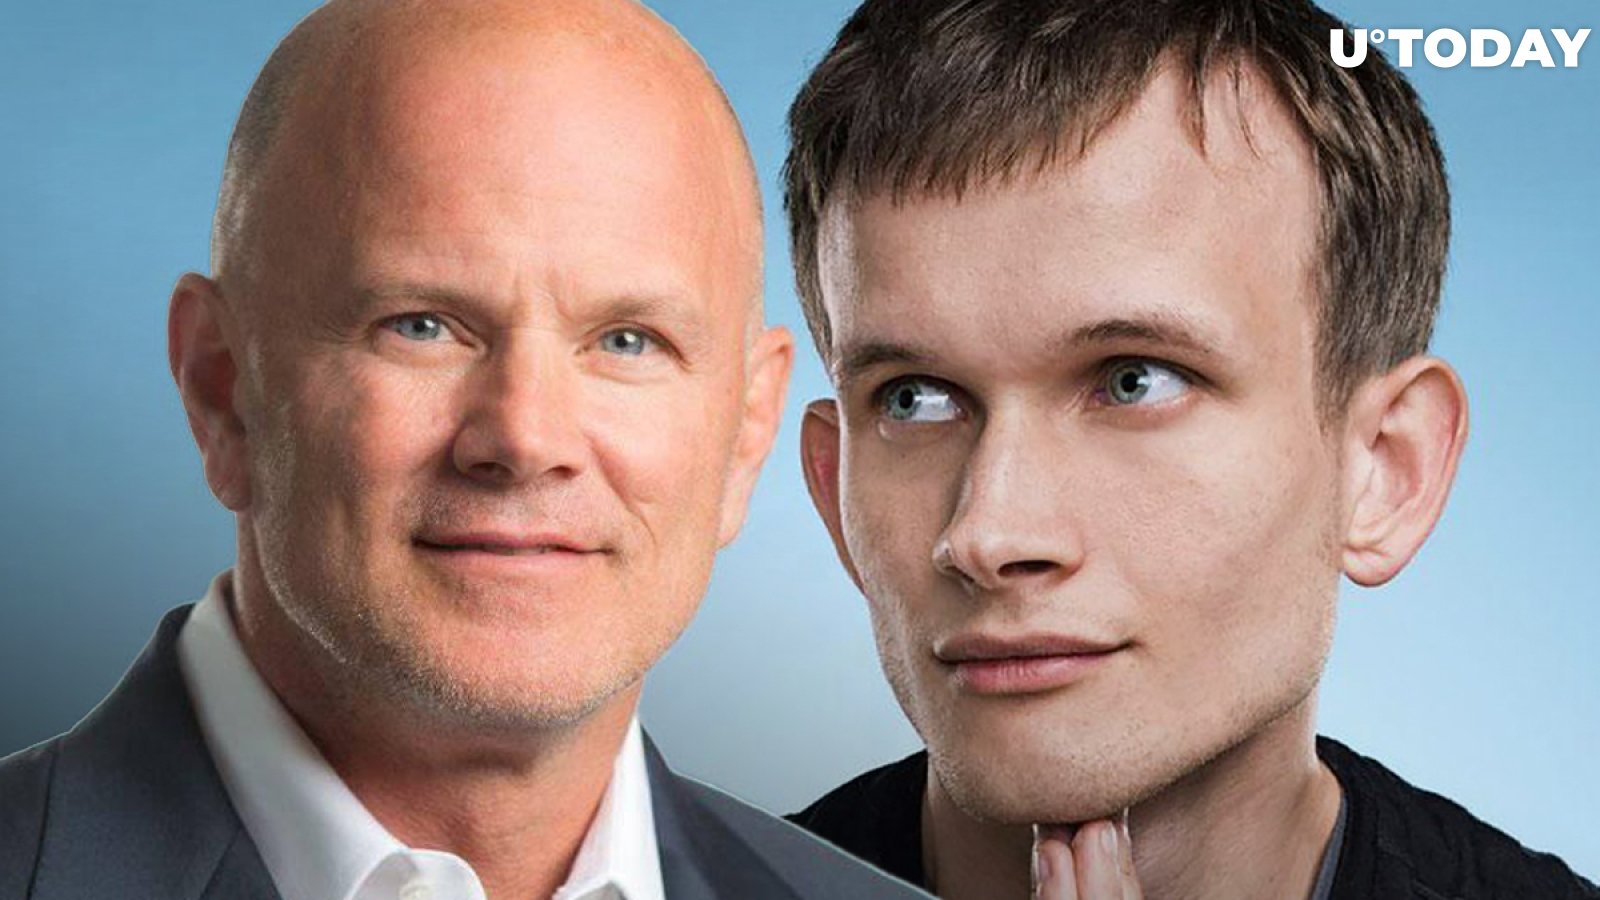 Mike Novogratz Gives Shoutout to Ethereum Founder Vitalik Buterin, Claims He's Playing Long Game